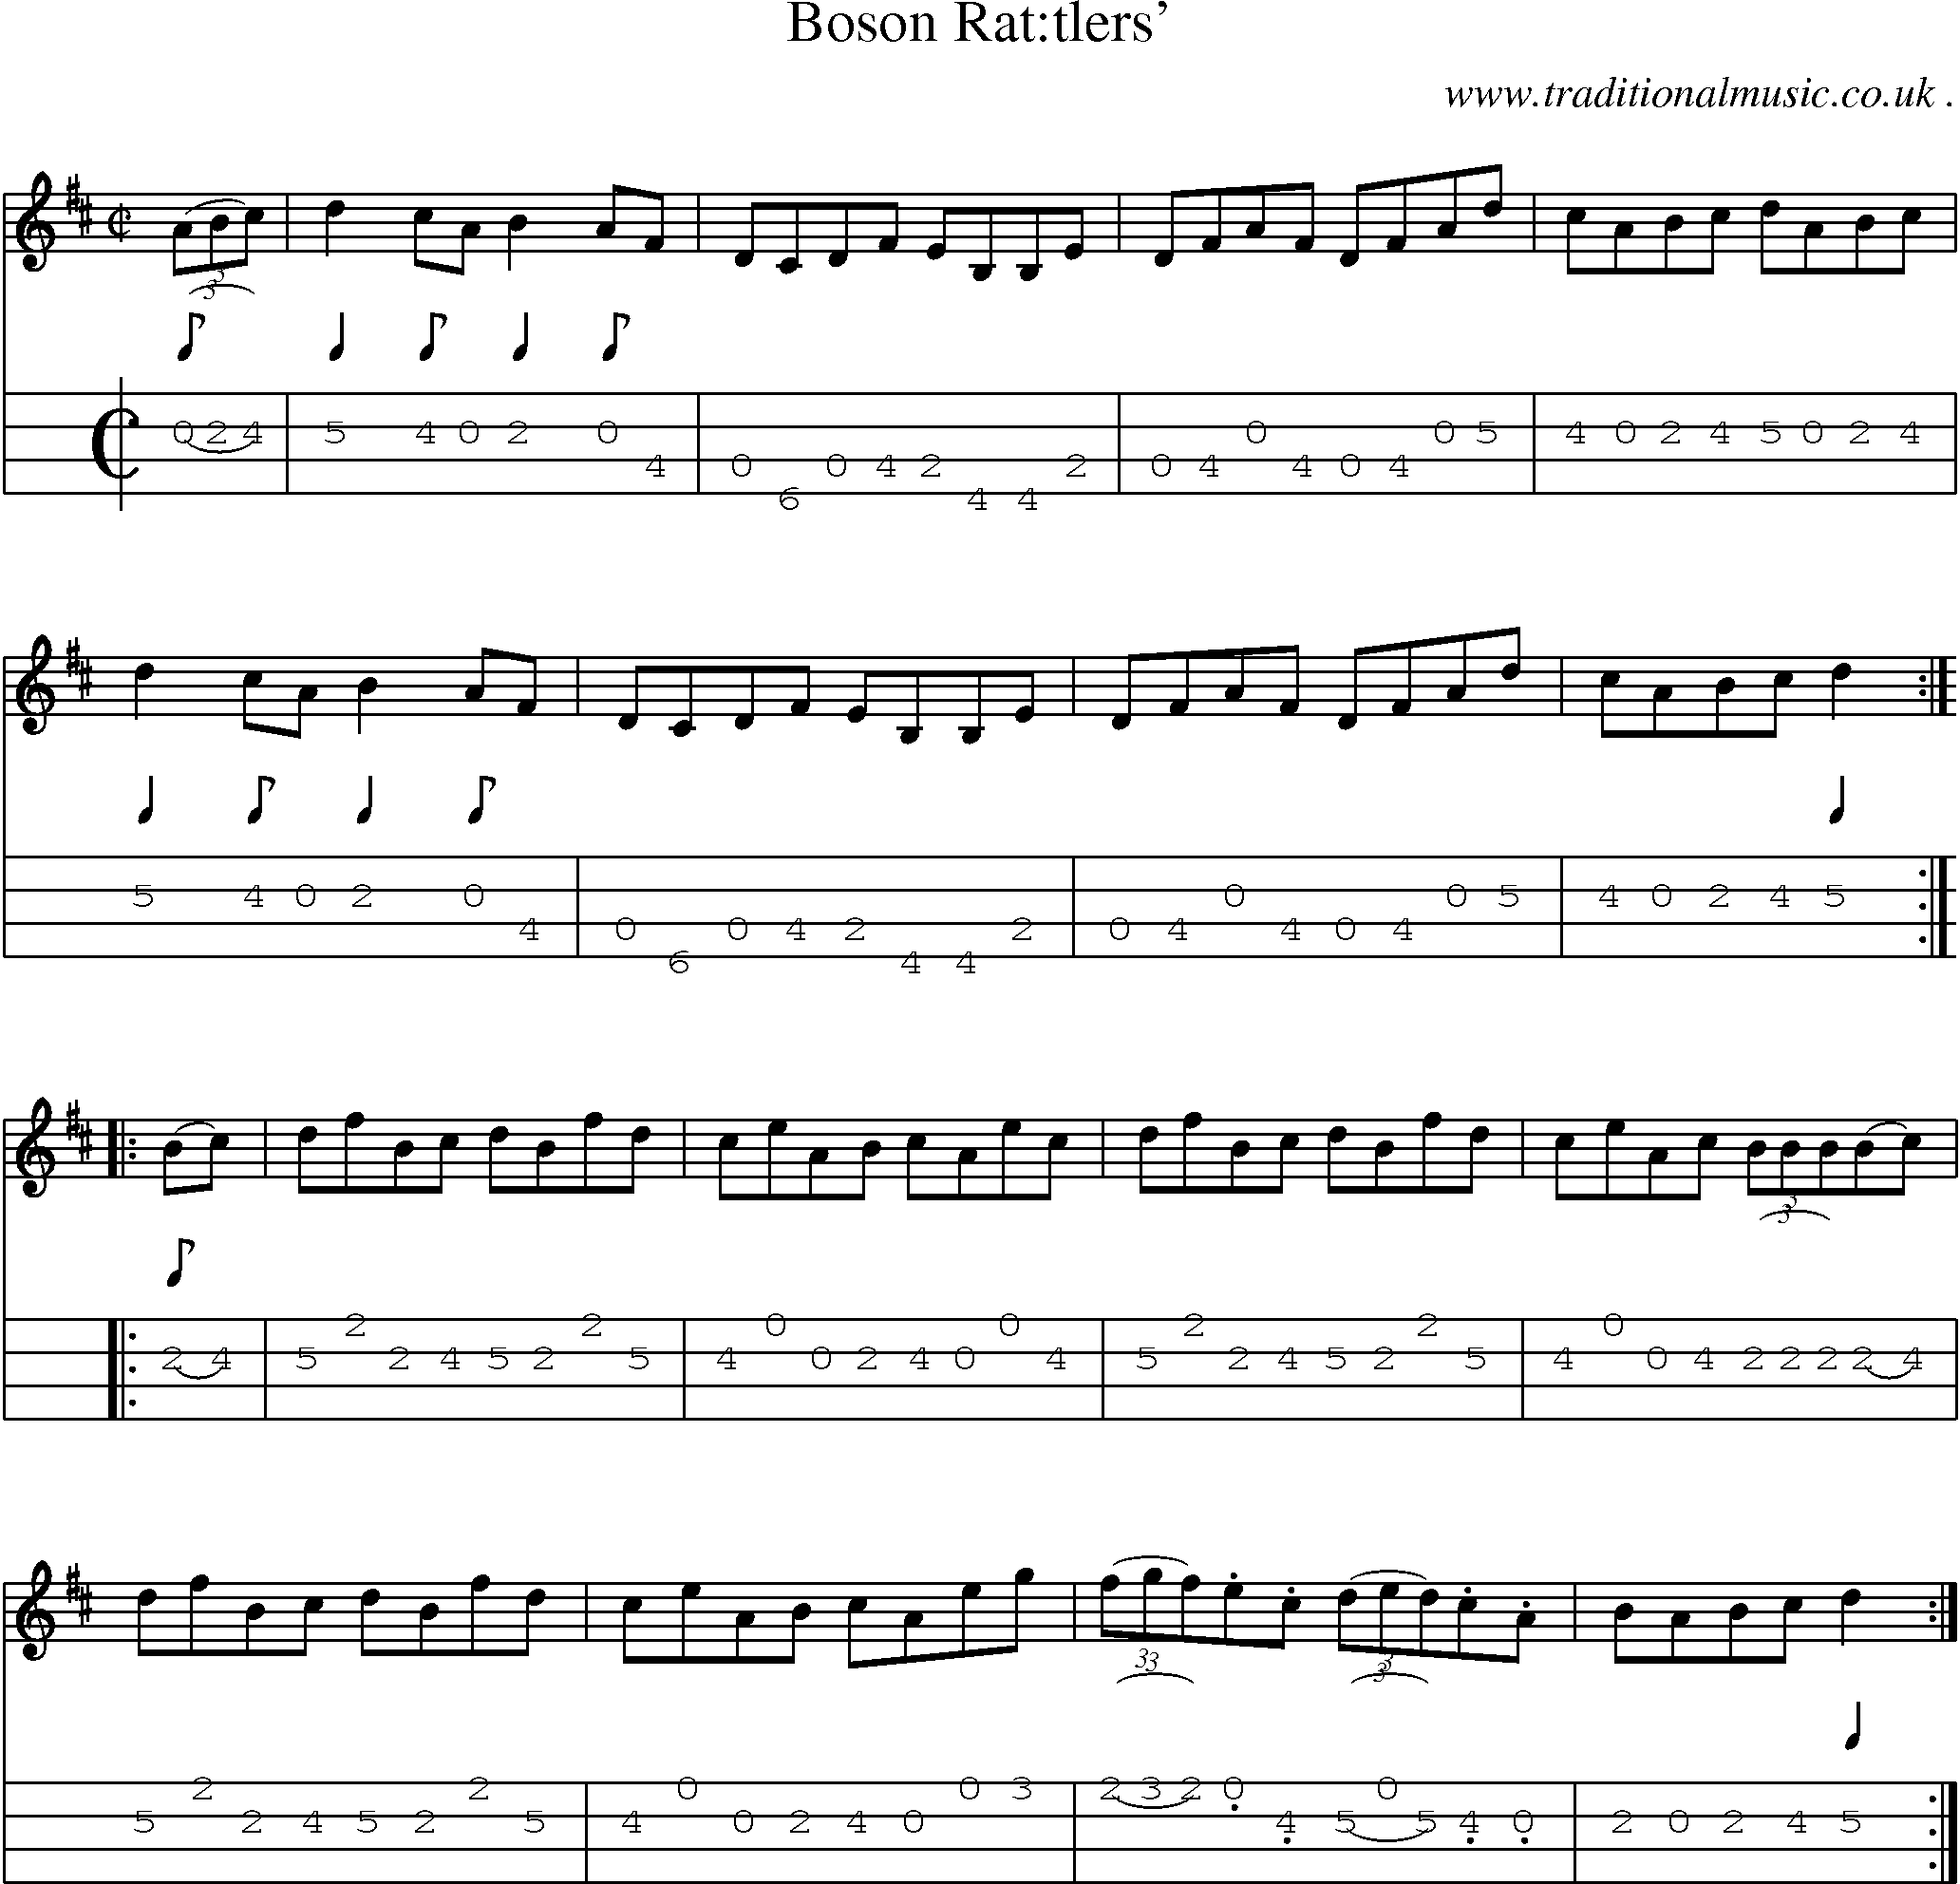 Sheet-Music and Mandolin Tabs for Boson Rattlers